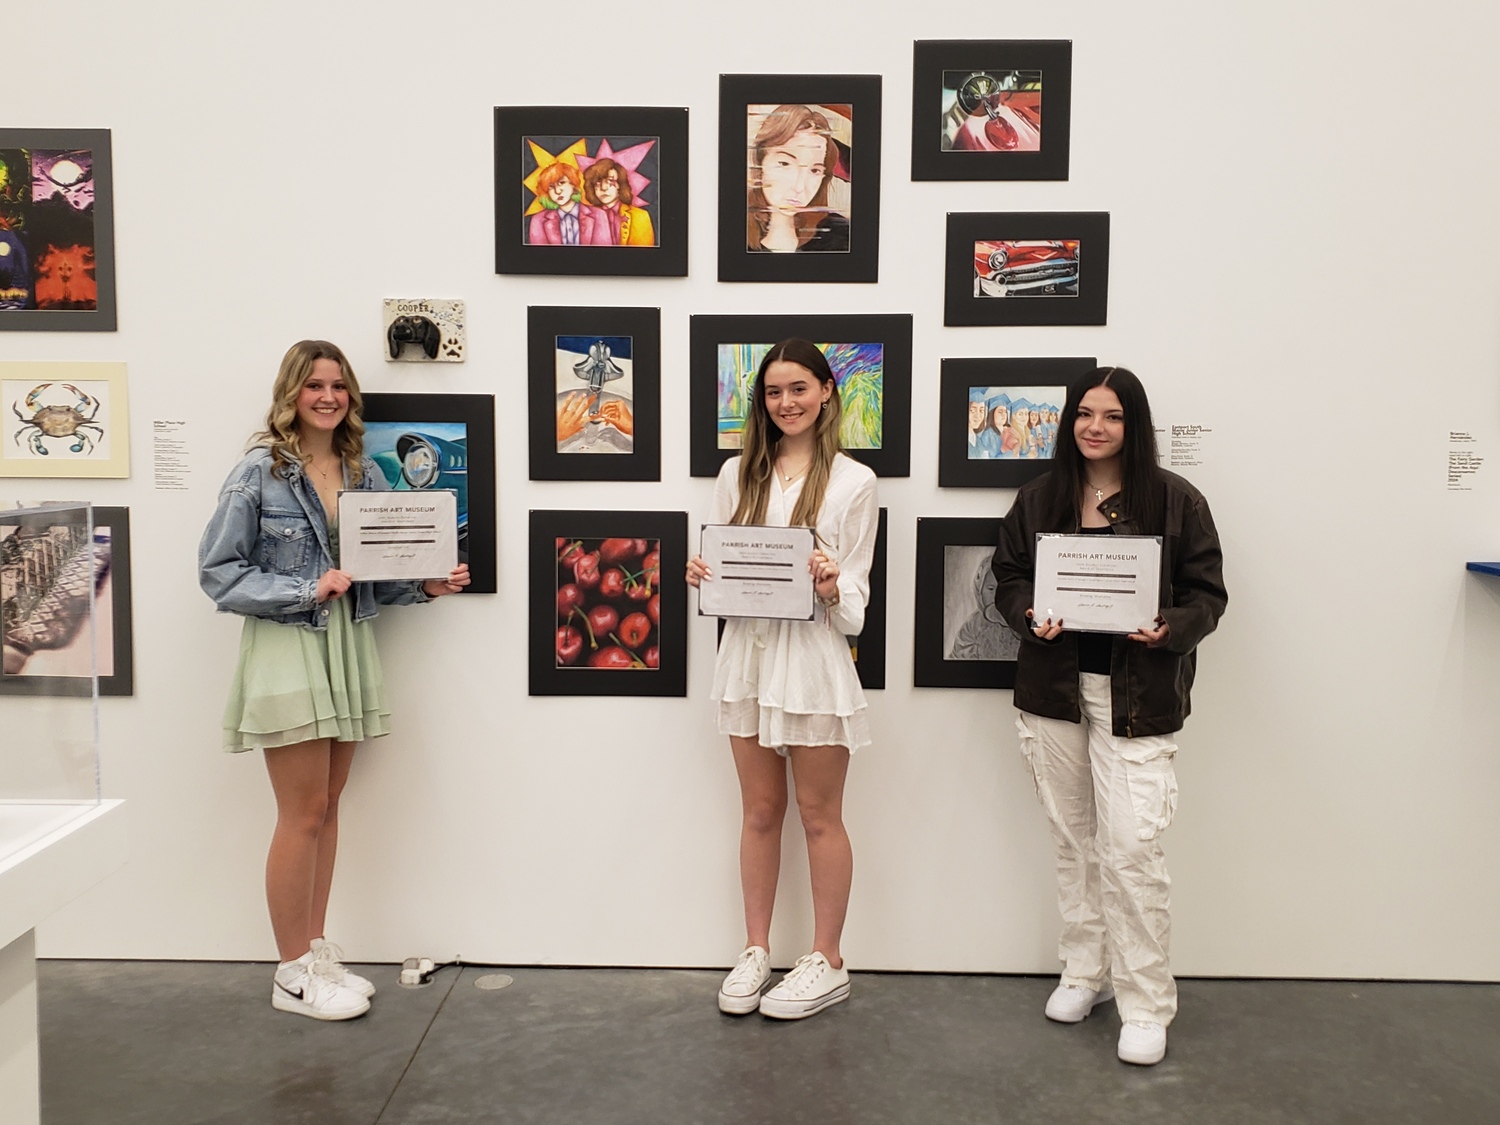 Eastport-South Manor Jr.-Sr. High School seniors Hailey Grieco, left, Heather Moran and Daniella Dolce, right,  received Awards of Excellence from the Parrish Art Museum for their work in the Student Exhibition. COURTESY EASTPORT-SOUTH MANOR SCHOOL DISTRICT